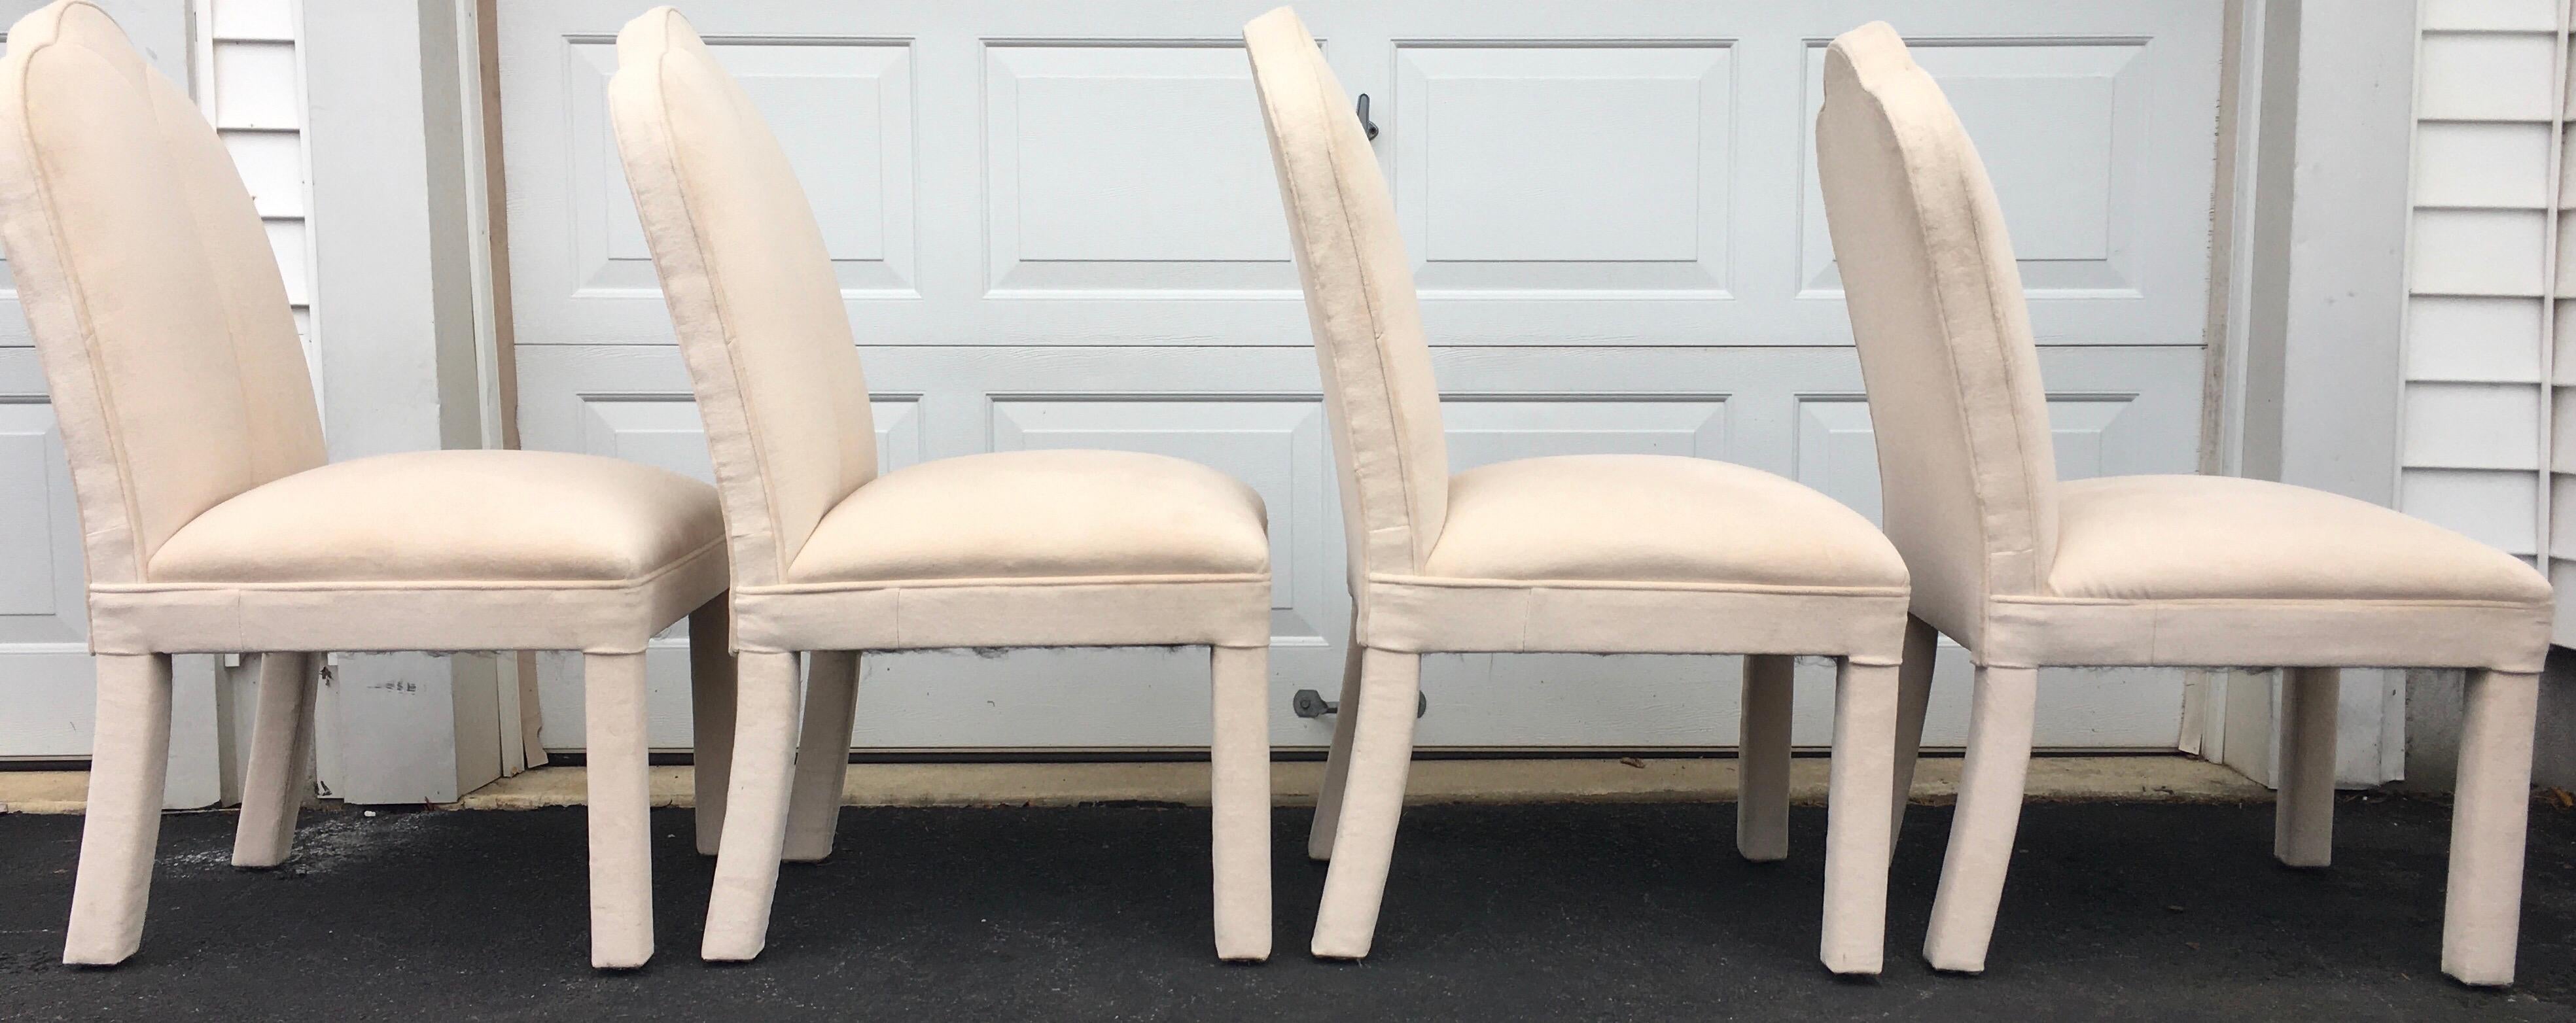 parsons style dining chairs